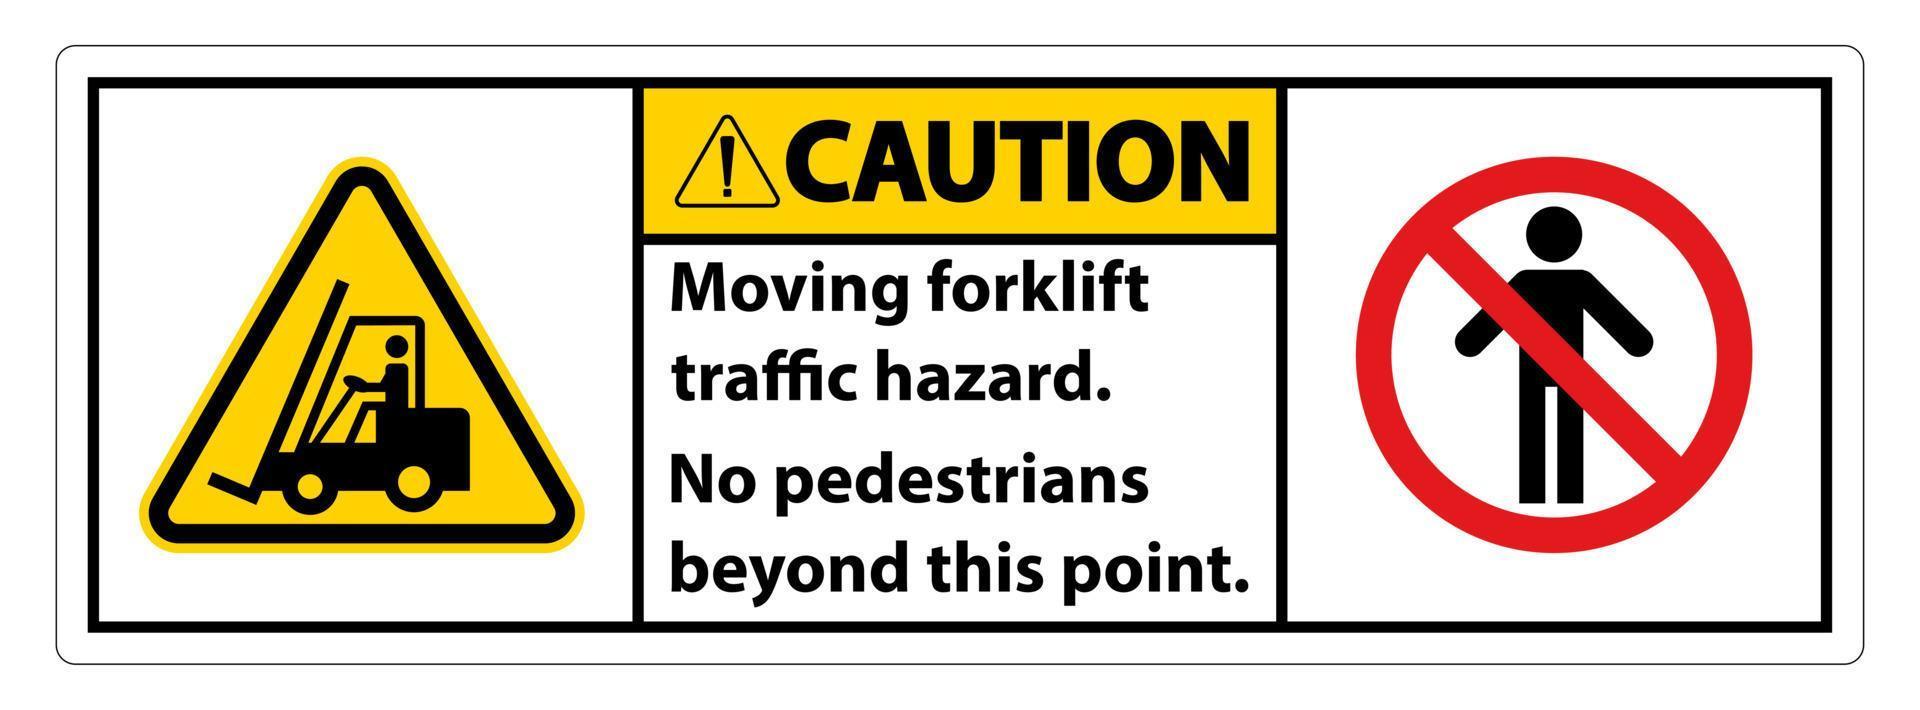 Moving forklift traffic hazard,No pedestrians beyond this point,Symbol Sign Isolate on White Background,Vector Illustration vector